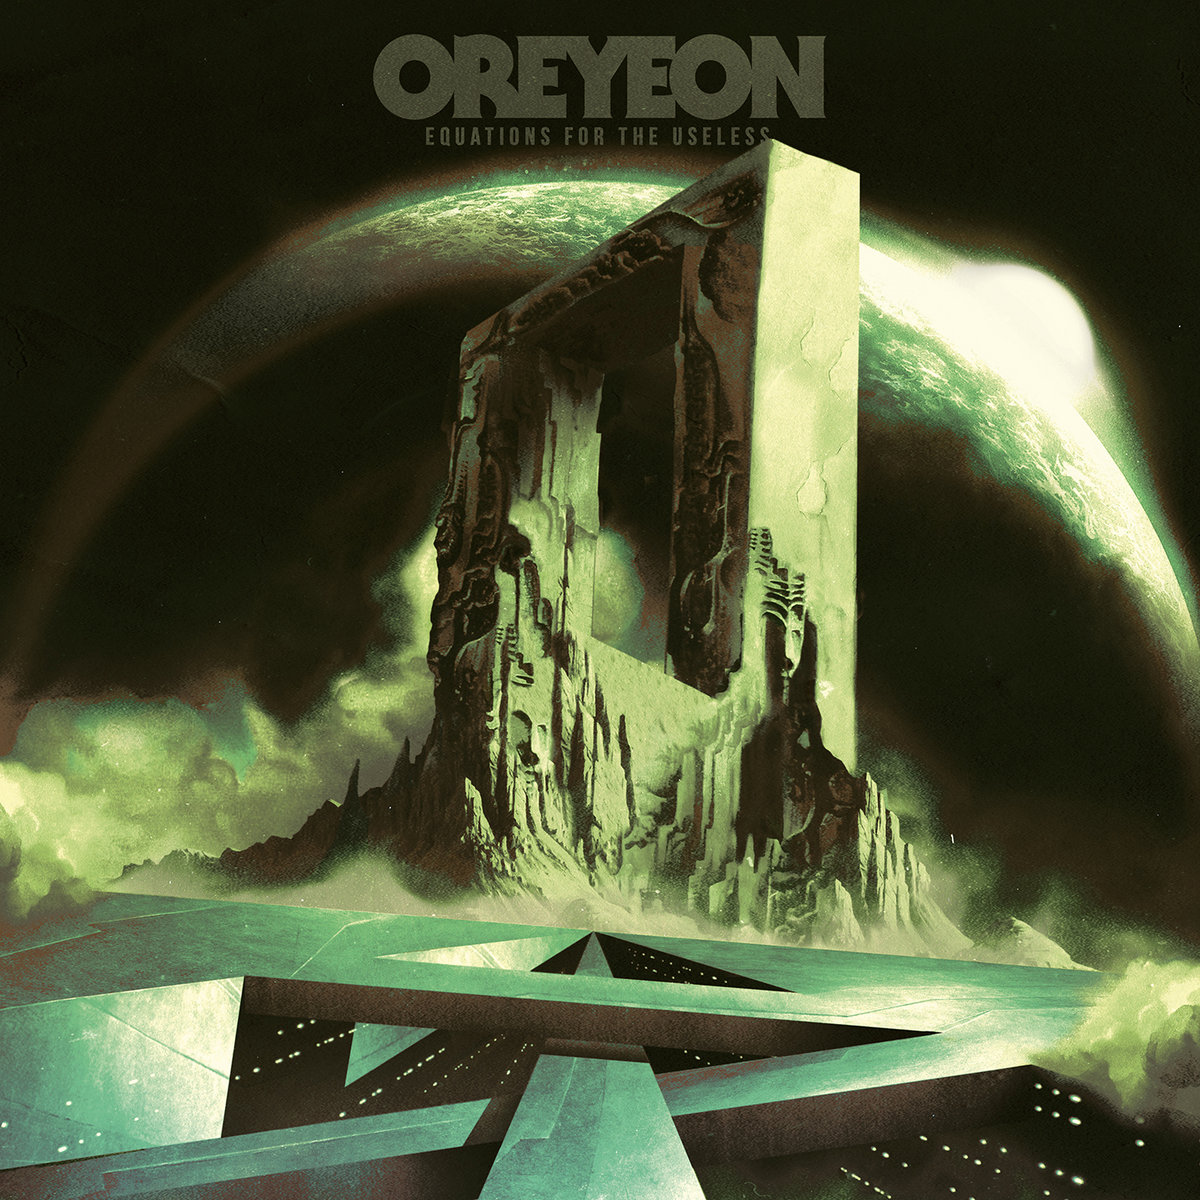 ALBUM REVIEW: Equations For The Useless - Oreyeon - Distorted Sound ...